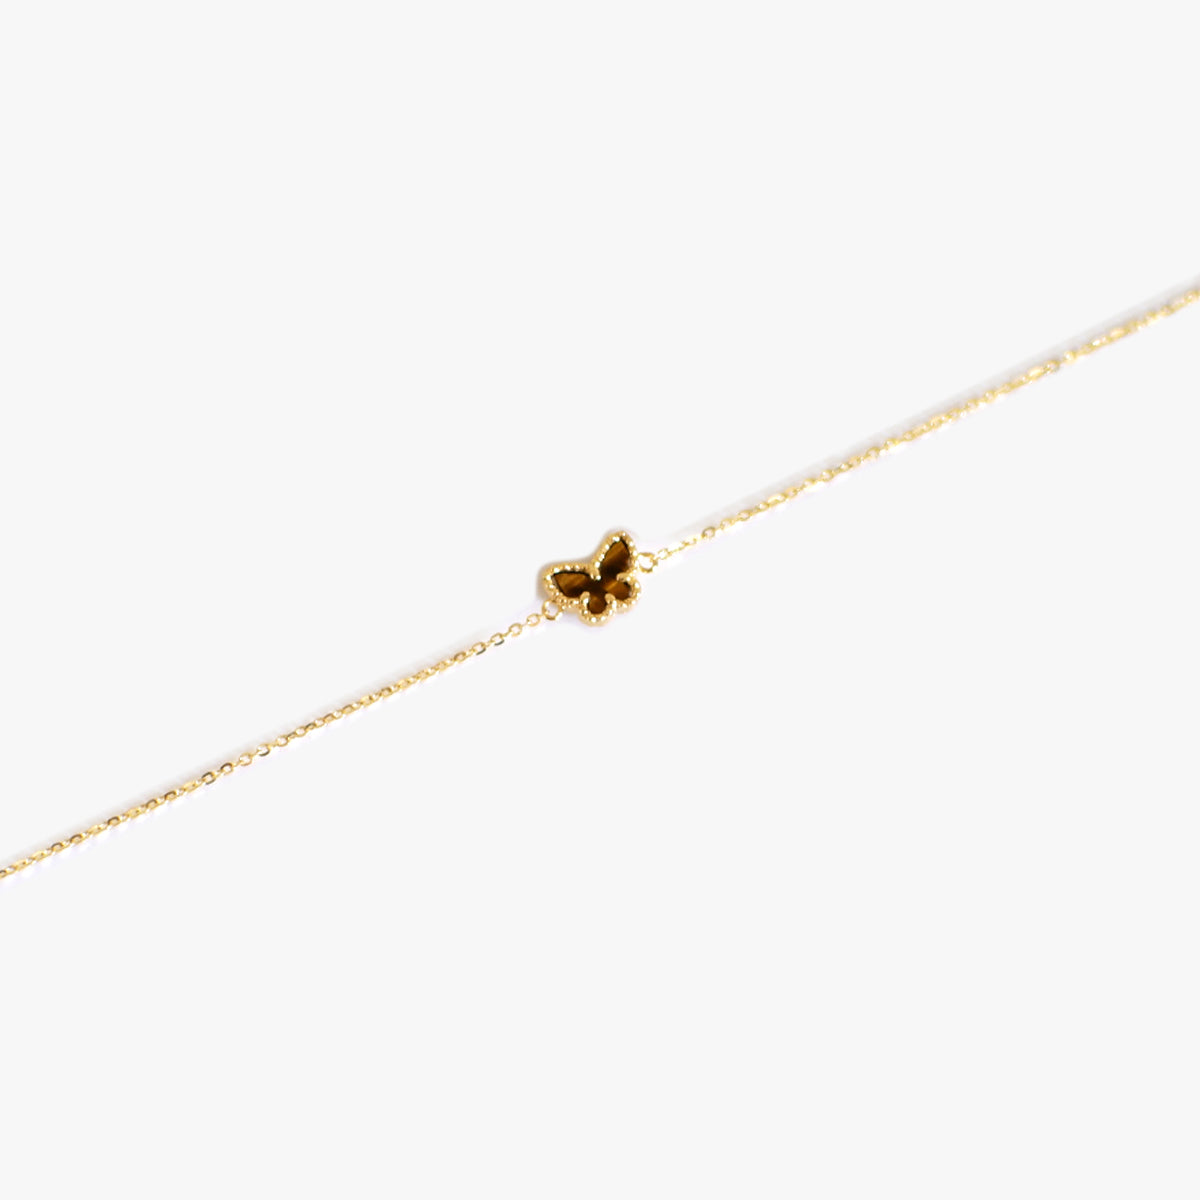 The Rare Mini Butterfly Bracelet in Solid Gold